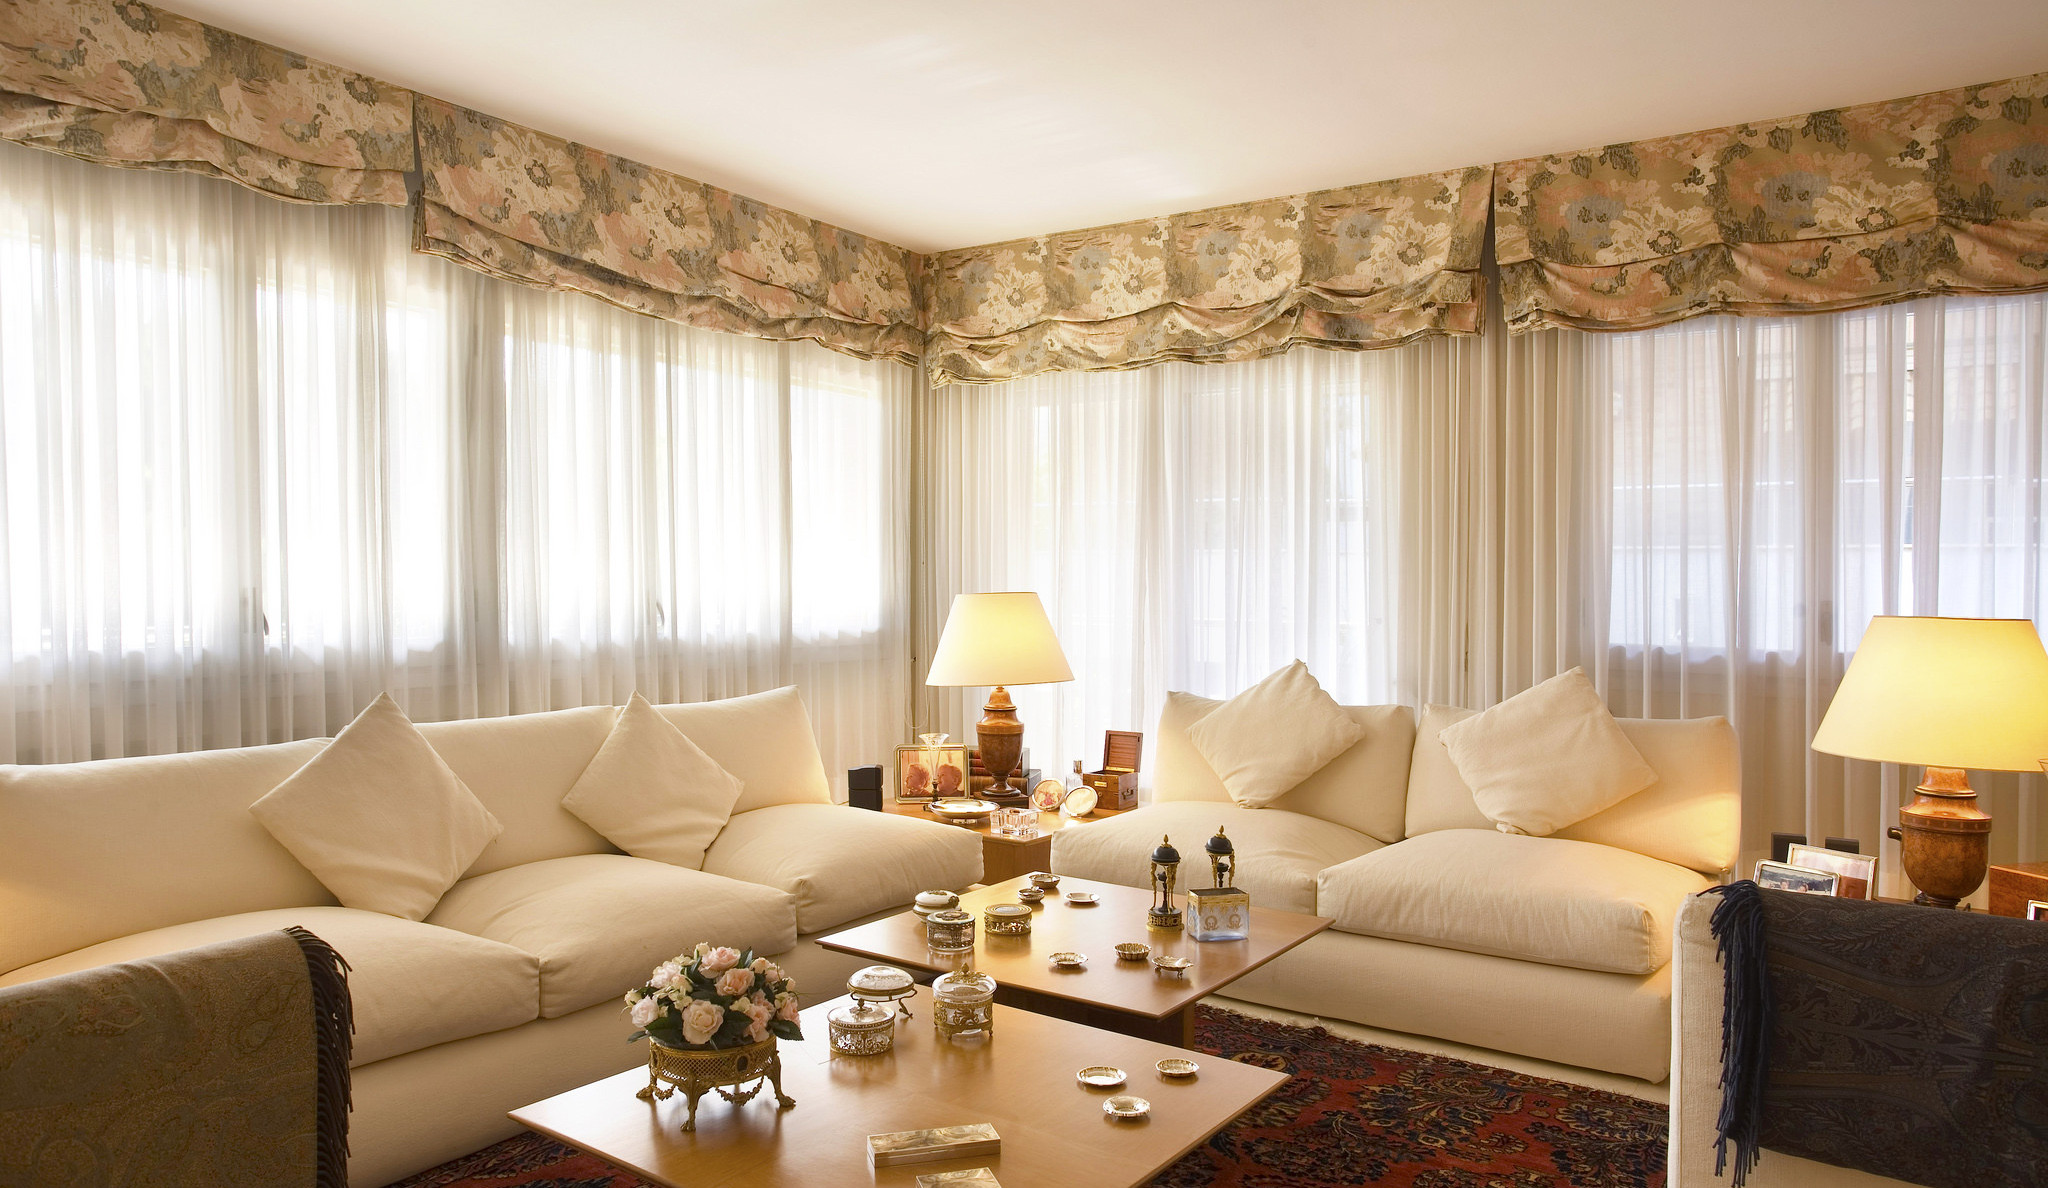 Living Room Drapes And Curtains
 Tips for Choosing Living Room Curtain